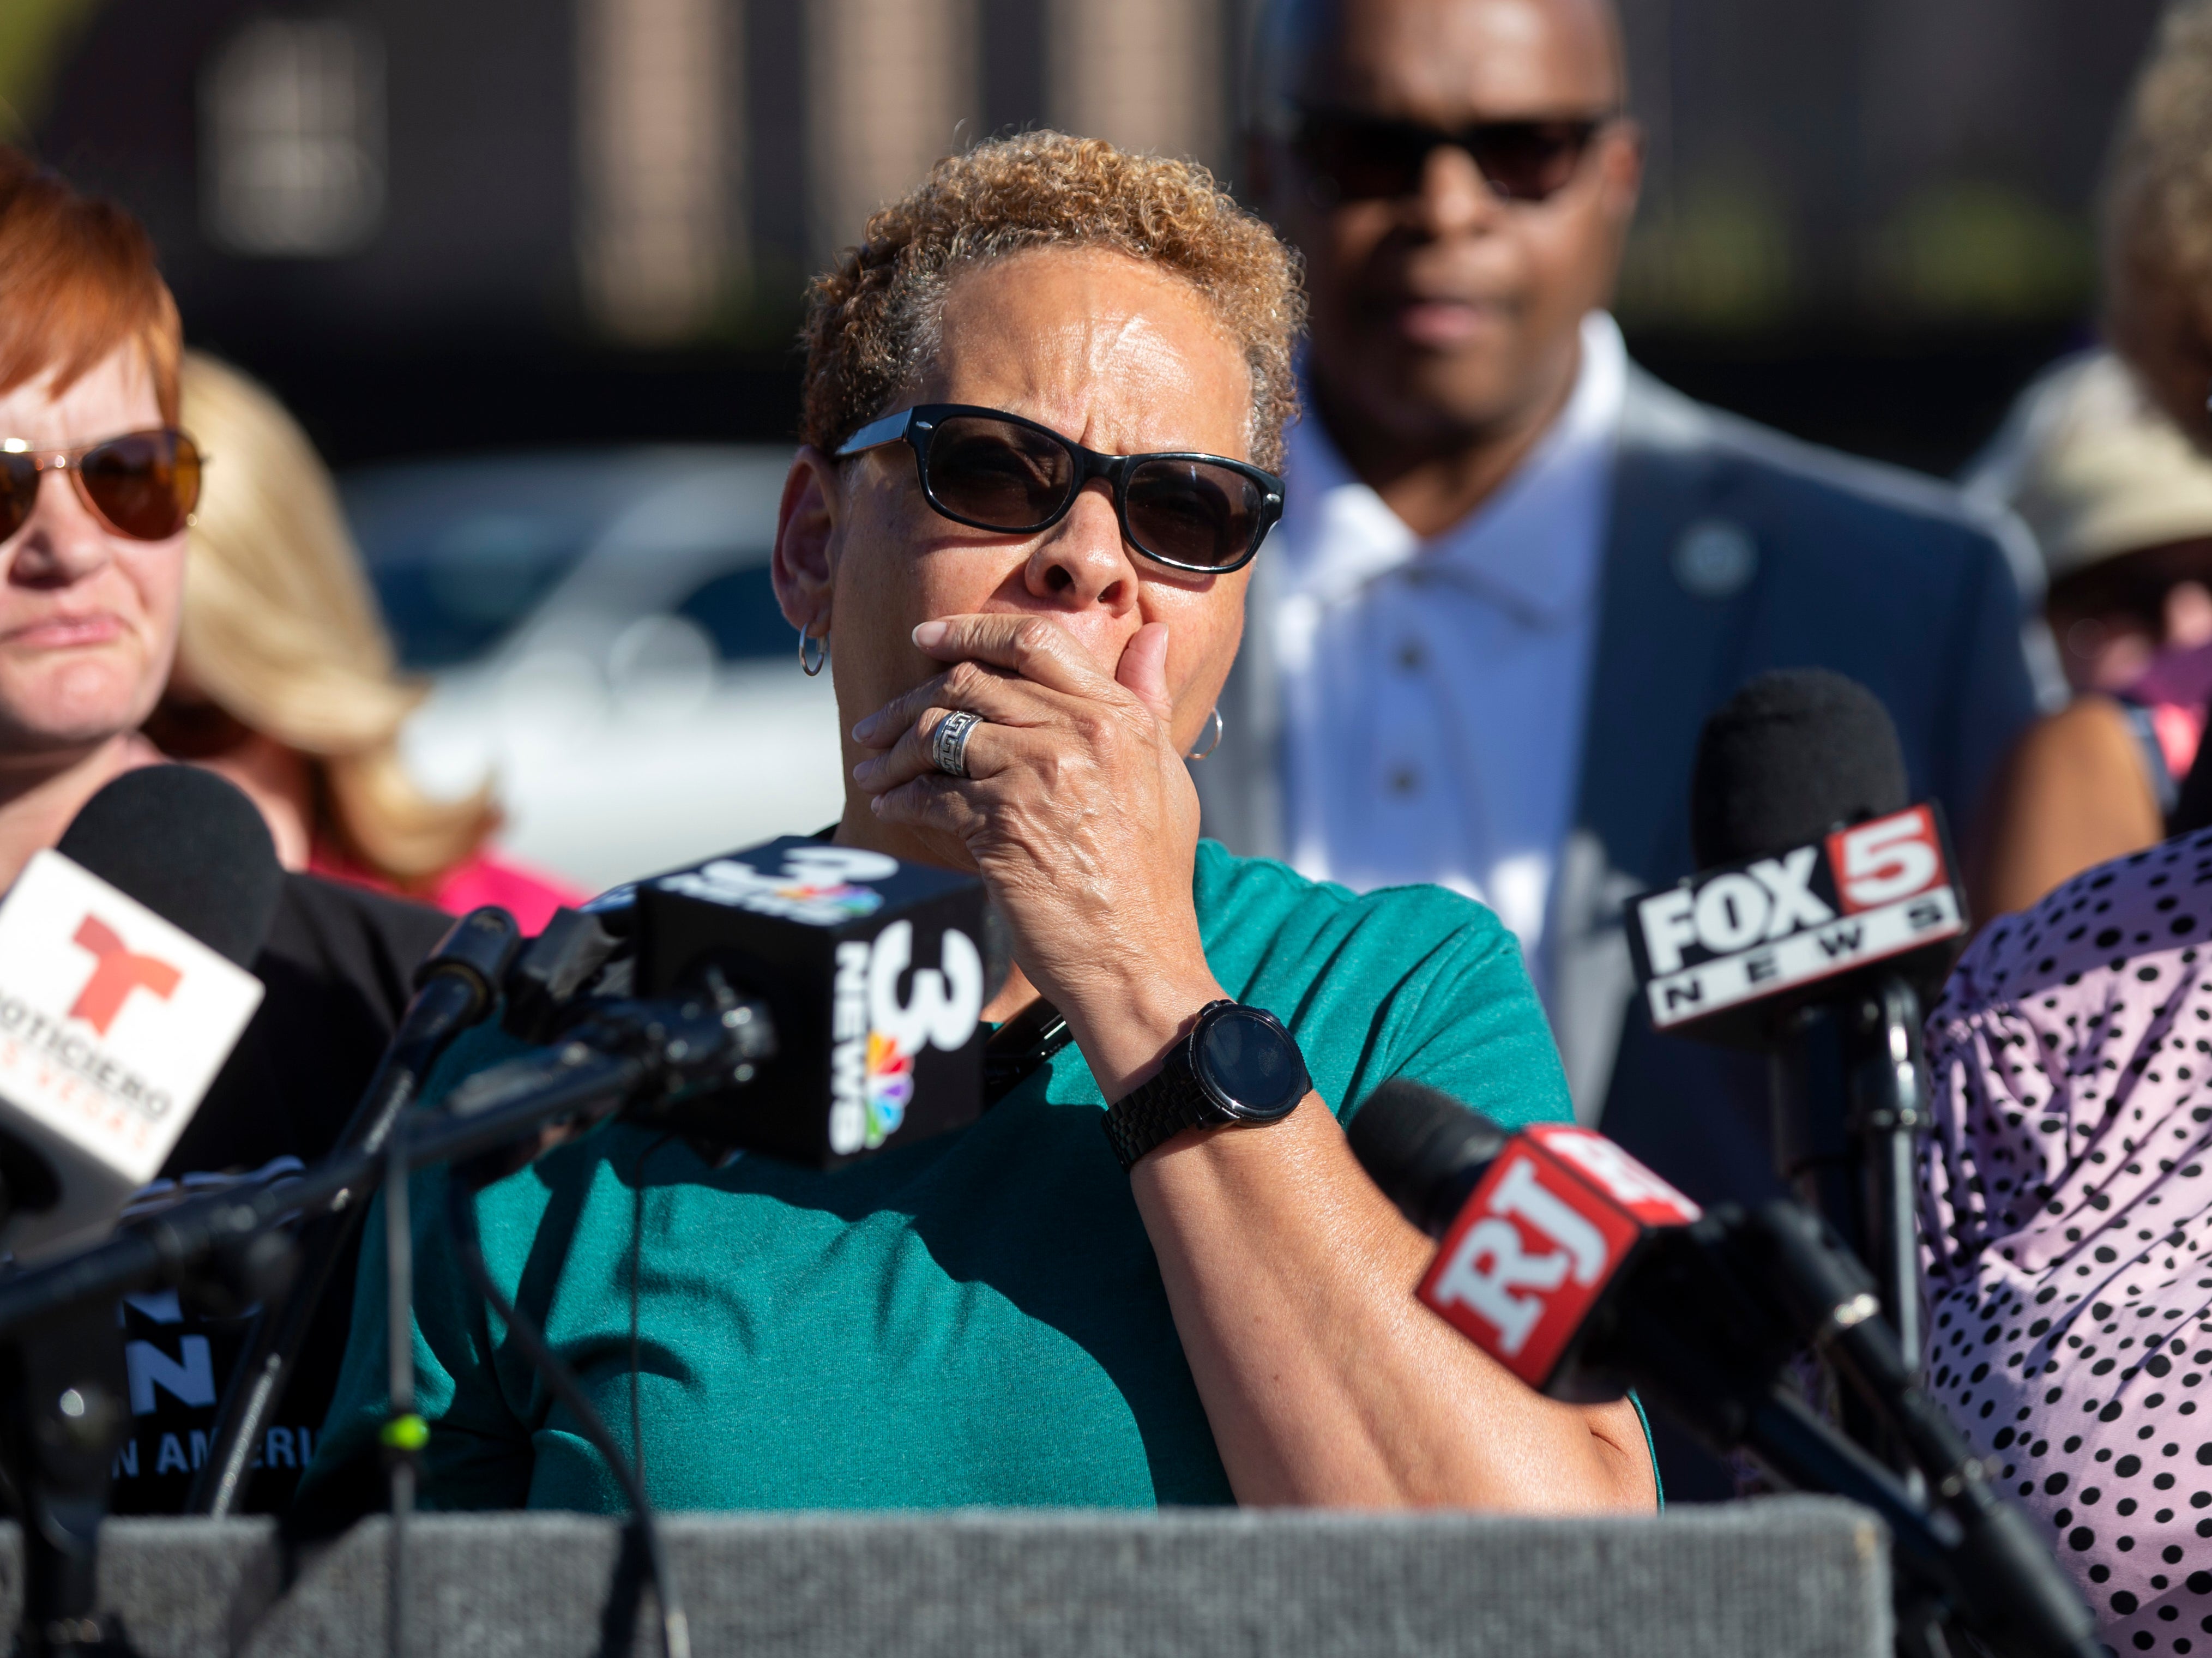 Pat Spearman, a Democratic state senator and candidate for North Las Vegas mayor, speaks during a news conference at the North Las Vegas Community Correctional Center in North Las Vegas, Friday, Oct. 21, 2022